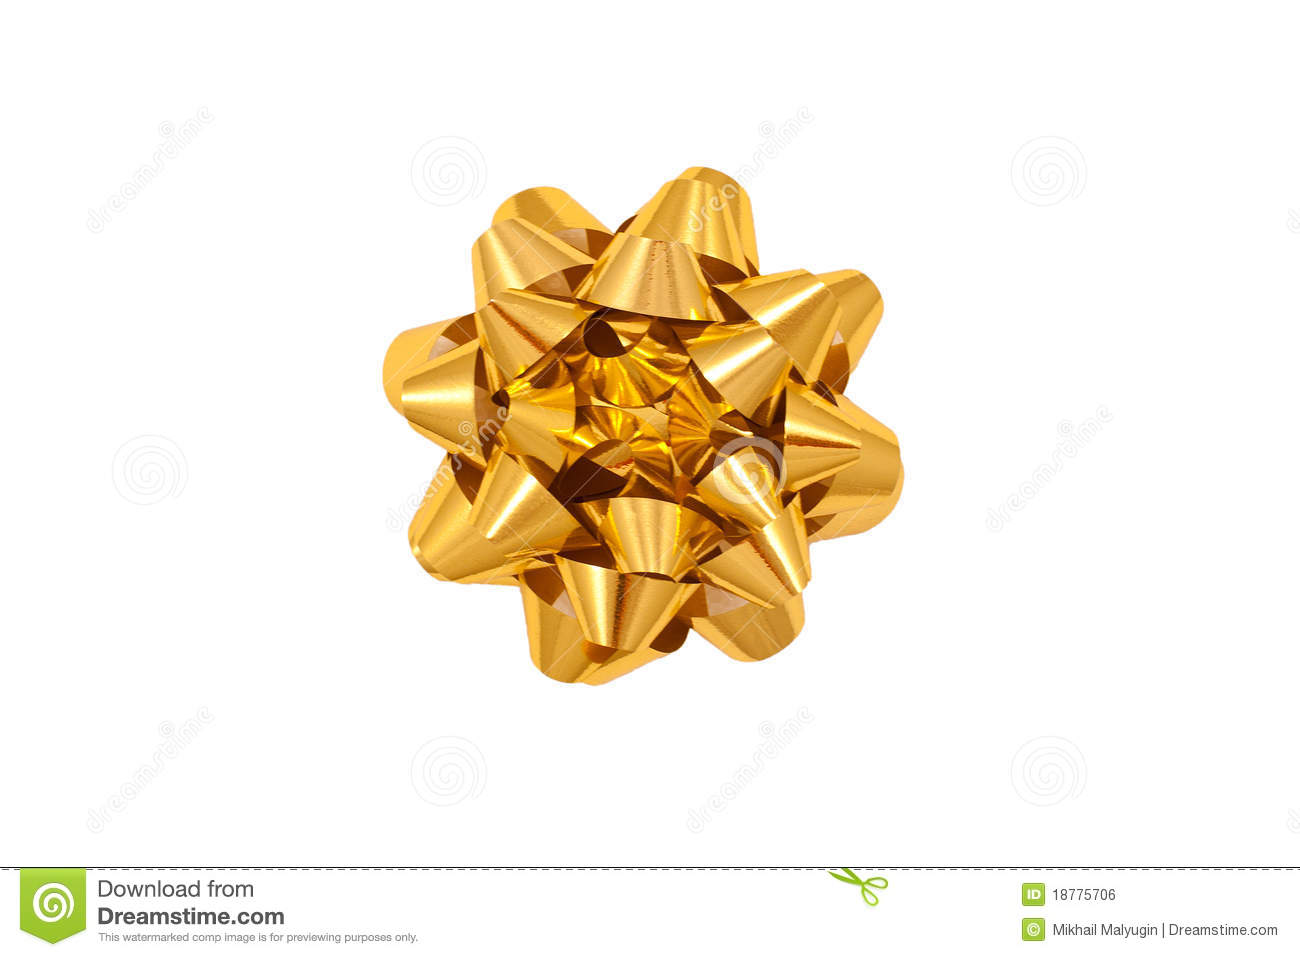 Color Image Of A Gold Gift Wrap Bow Royalty Free Stock Image   Image